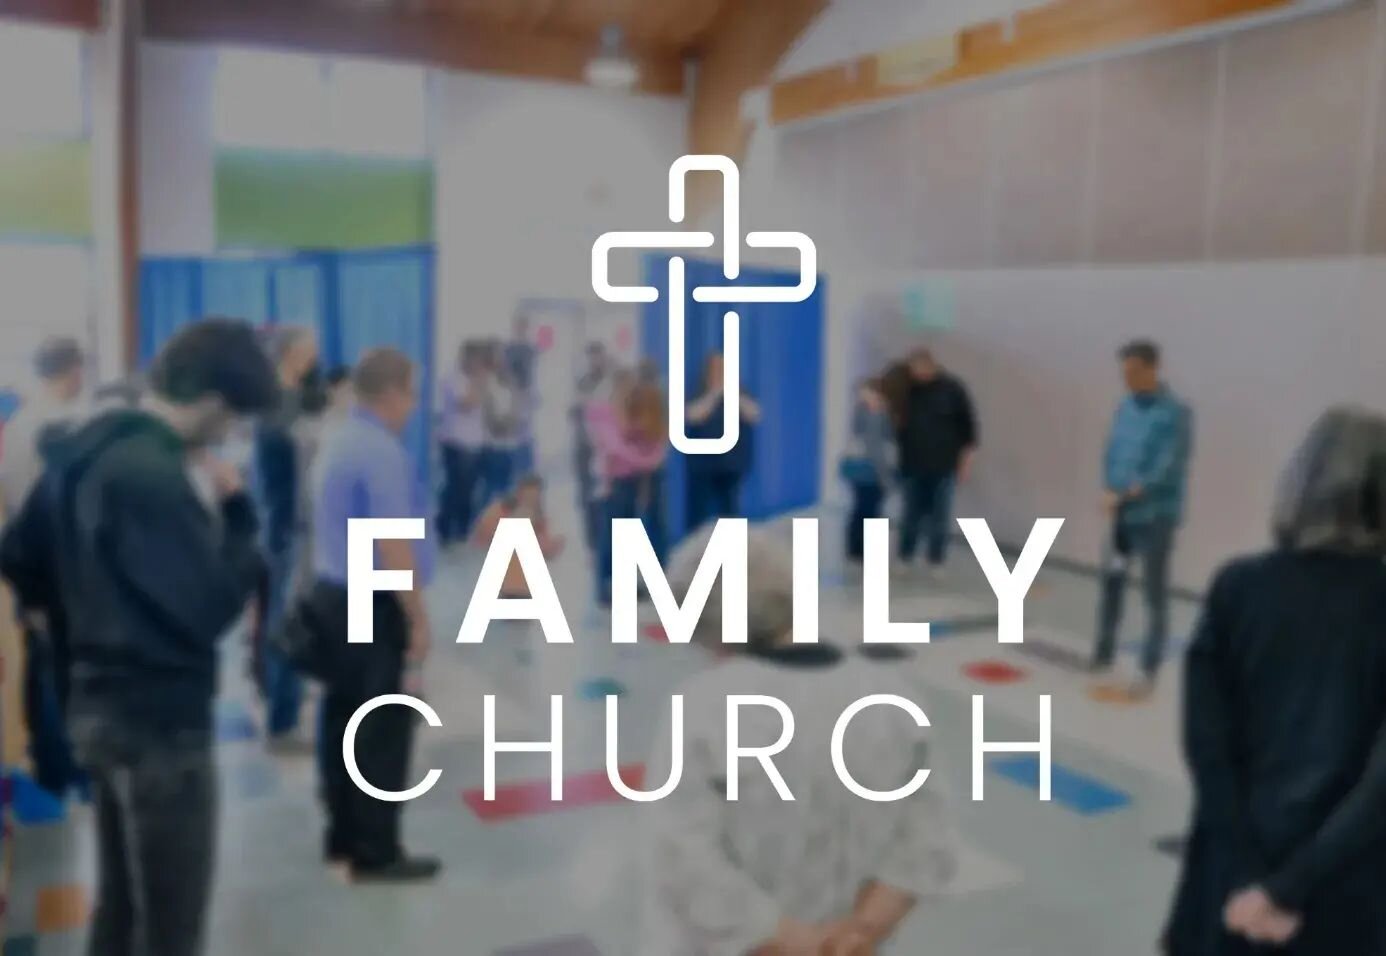 We can't wait to celebrate ✌🏻 years of the Lord's faithfulness together today at Family Church!